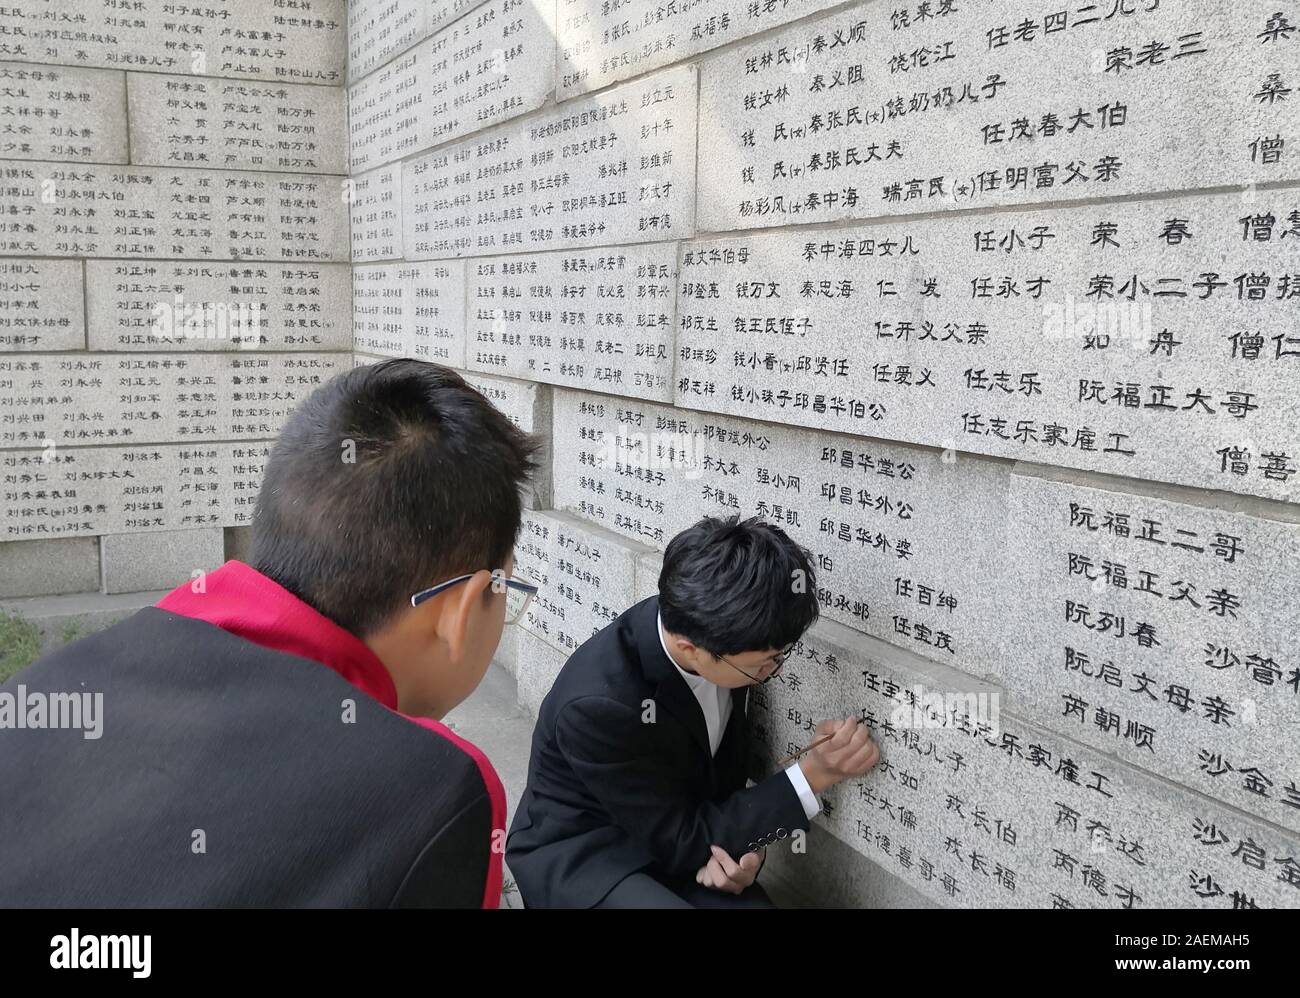 Volunteers from local universities trace the names of victims, who were killed by Japanese soldiers during the Nanjing Massacre in Anti-Japanese War i Stock Photo